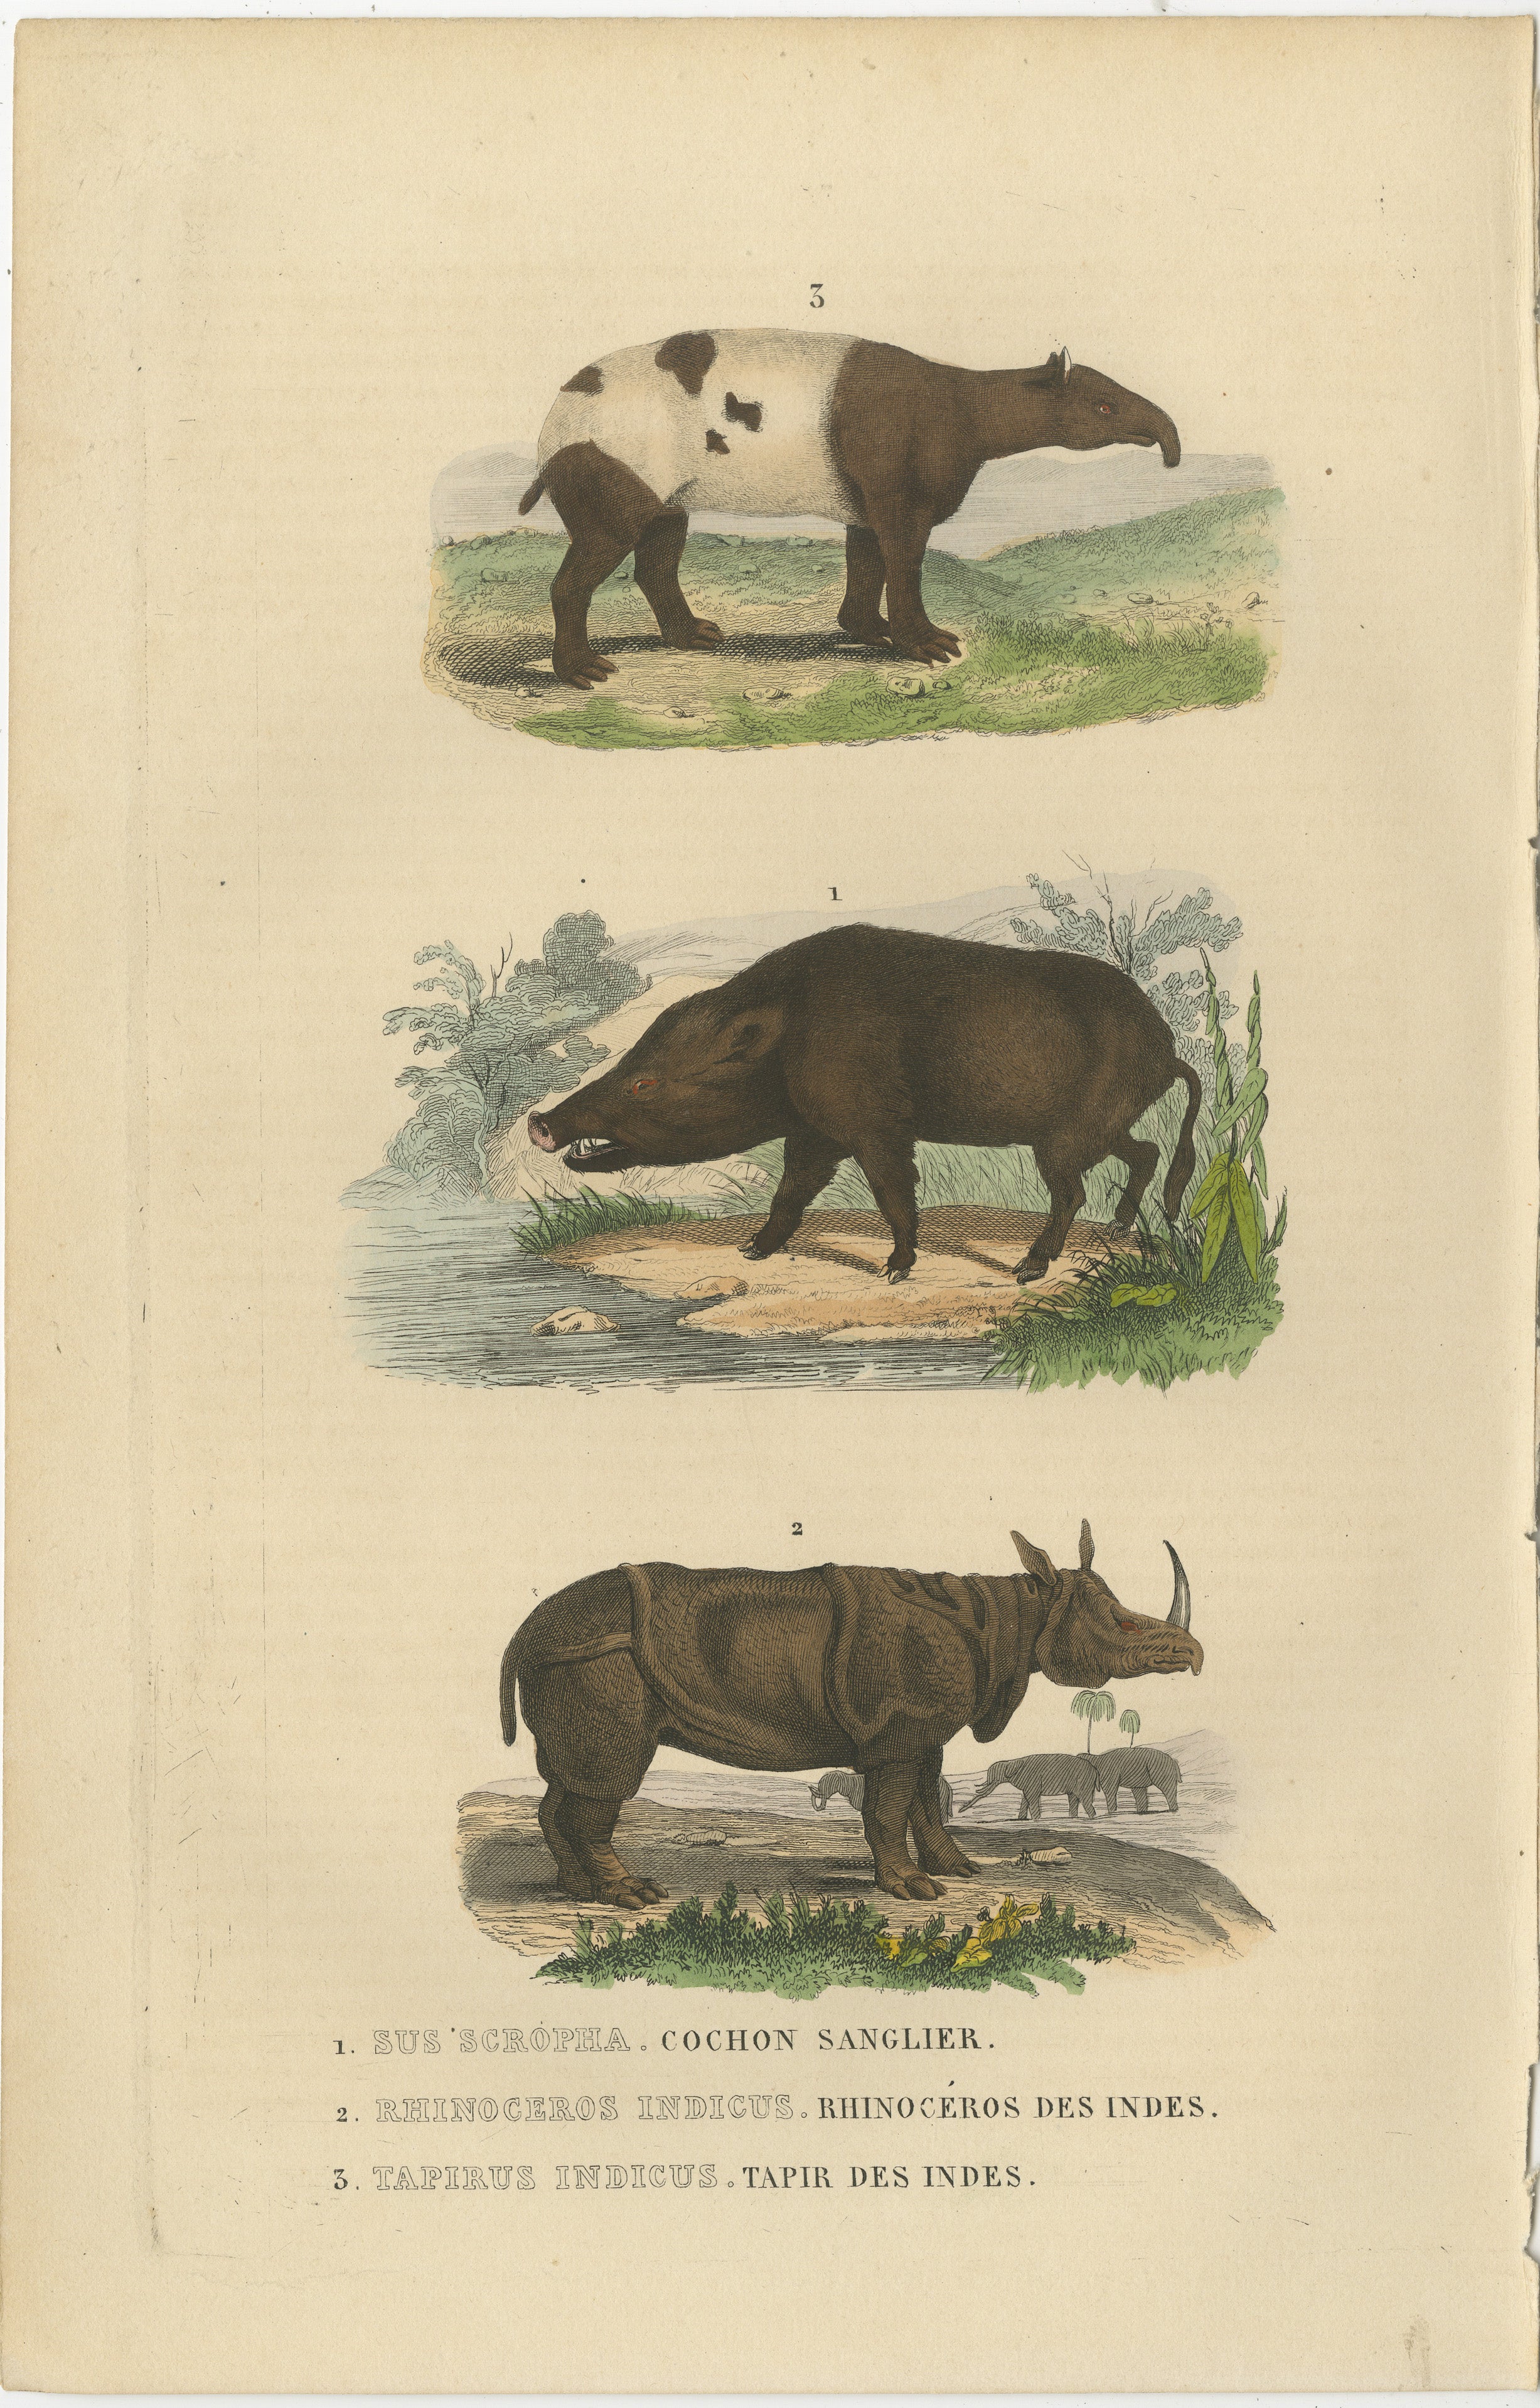 An original antique hand-colored engraving featuring three different species of animals, each labeled in both Latin and French:

1. **Sus scrofa** - Commonly known as the wild boar. This illustration shows a dark-colored boar with sharp tusks and a